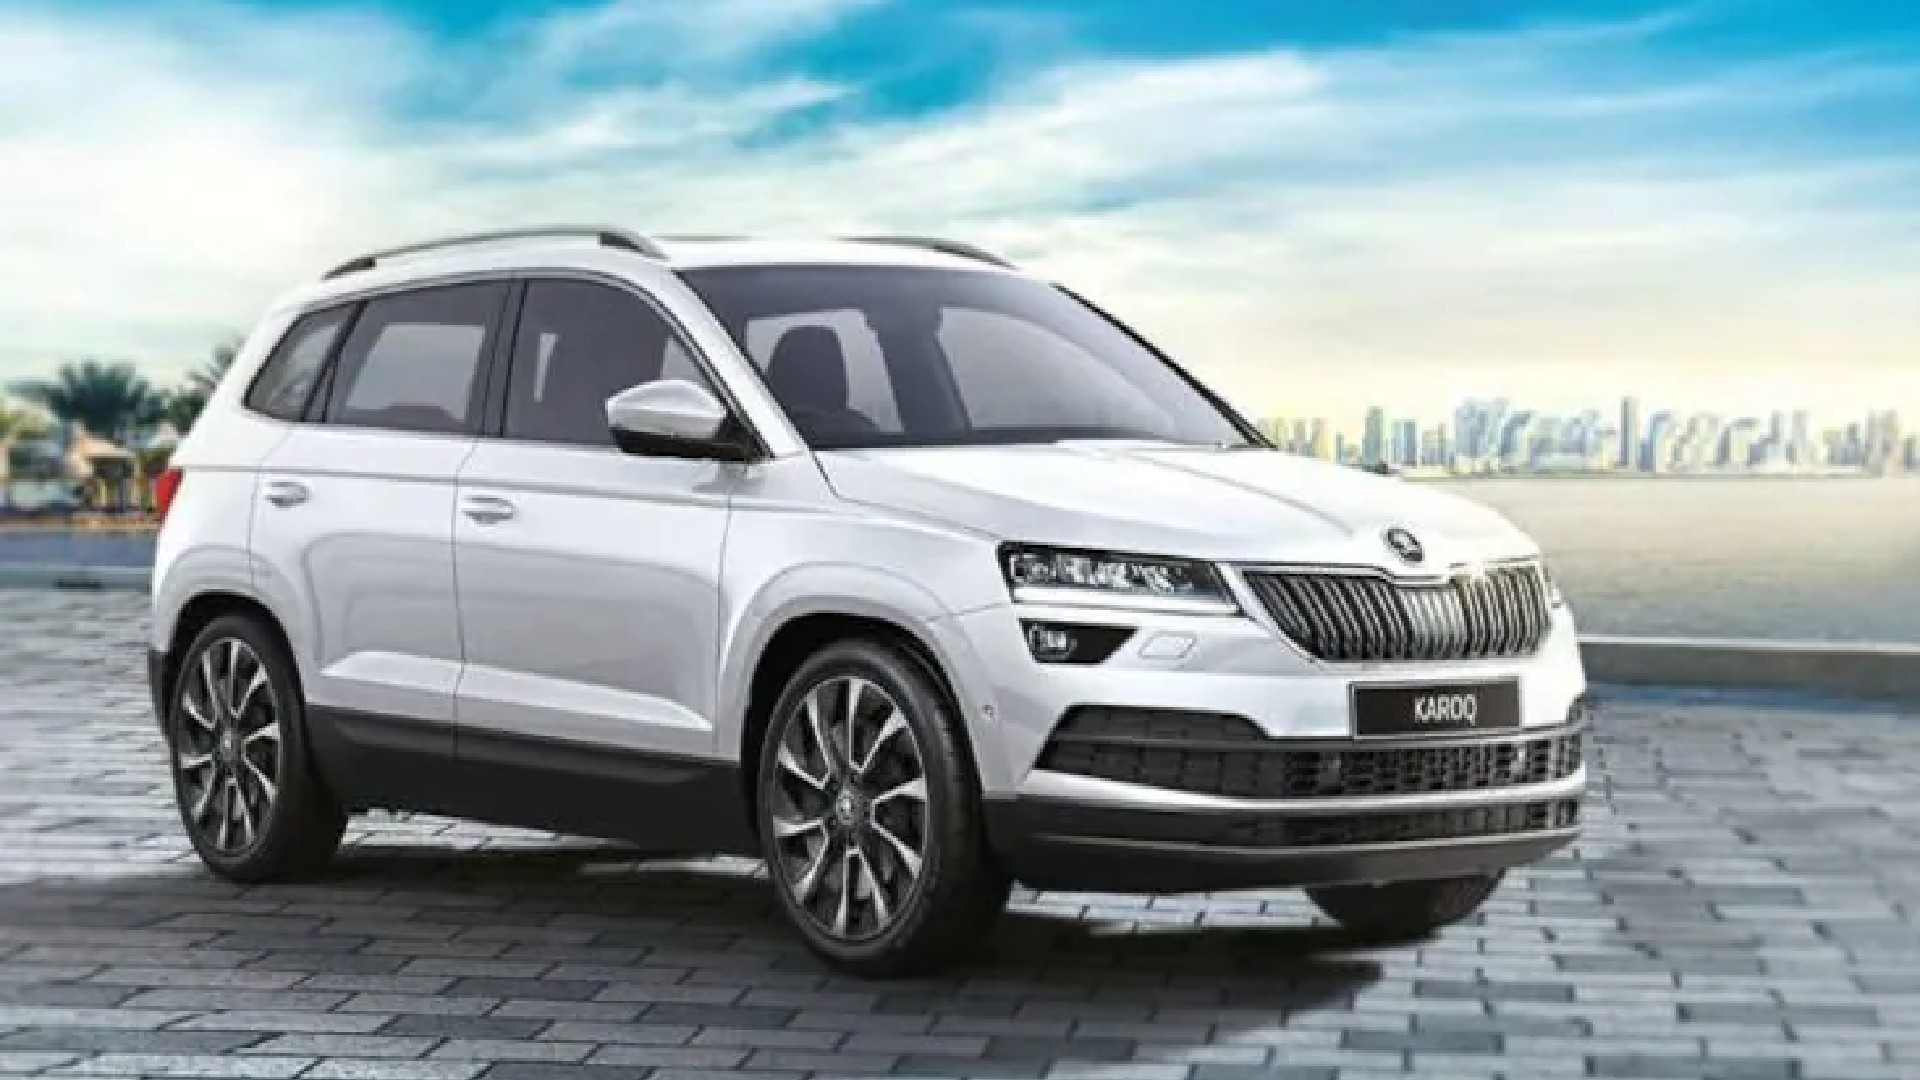 This Mid-Size SUV From Skoda Can Beat Kia Seltos In India? Bookings Start From June